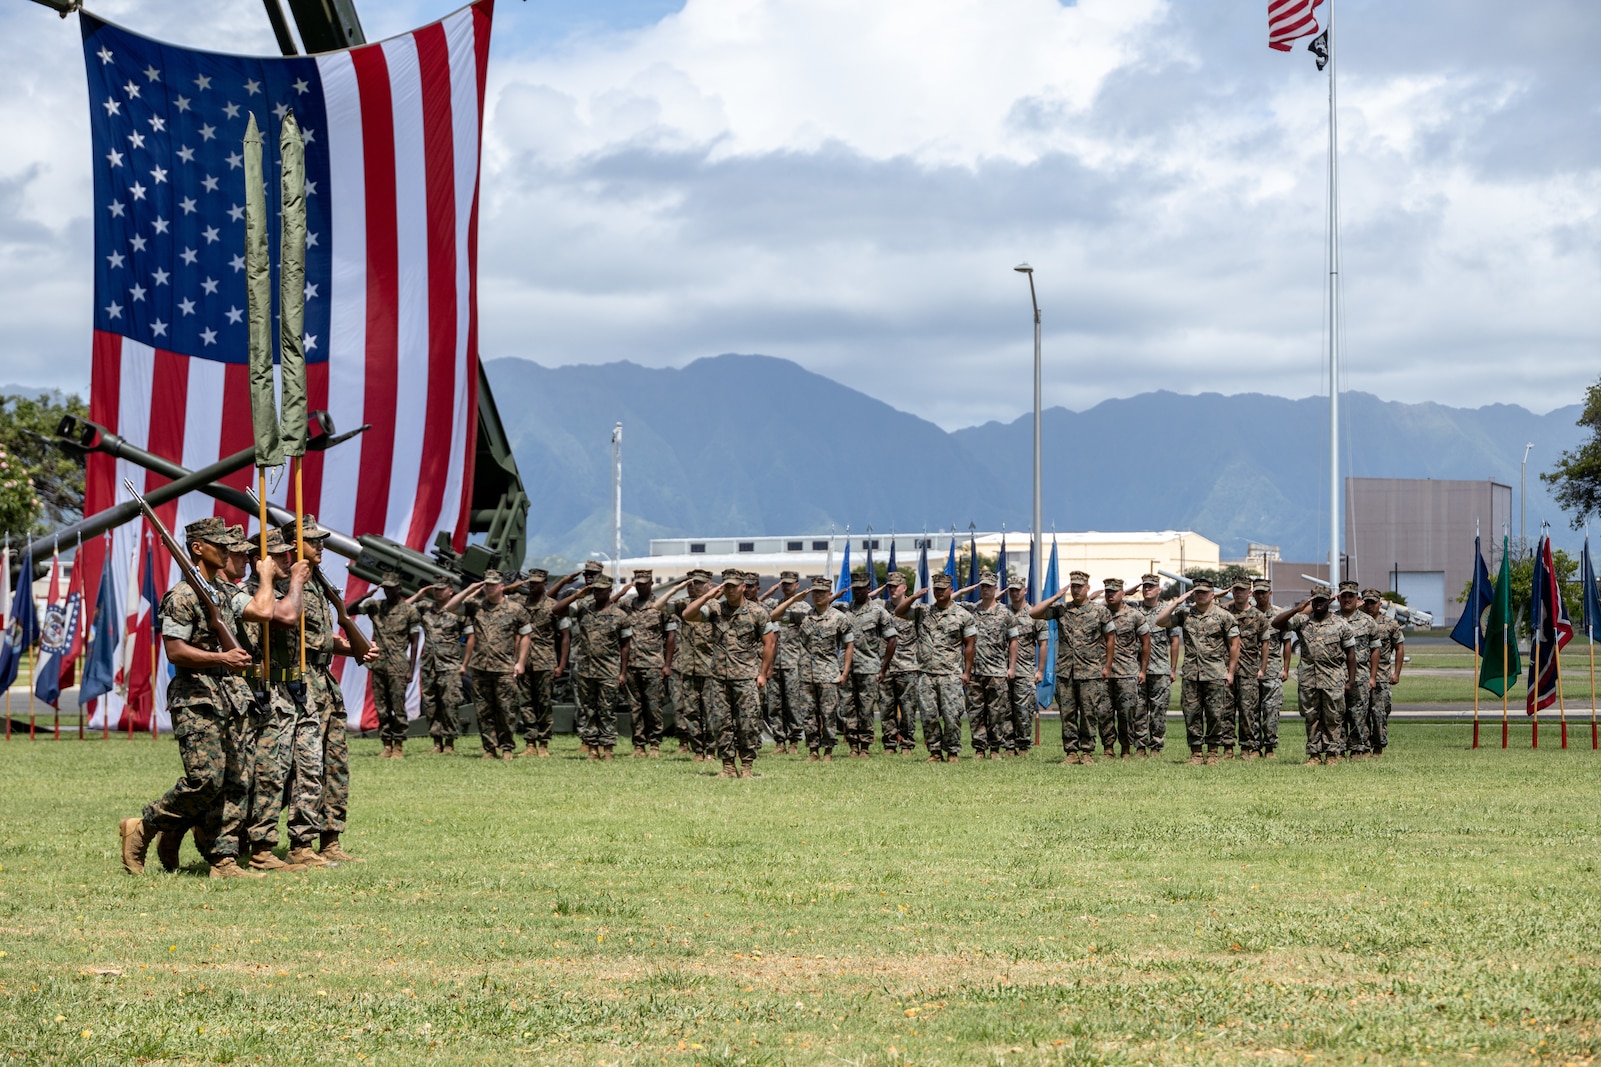 U.S. Marines with 1st Battalion, 12th Marines, 3d Marine Division, participate in the unit’s deactivation ceremony on Marine Corps Base Hawaii, May 26, 2023. The deactivation is in accordance with Force Design 2030’s modernization efforts. The battalion has played a valuable role in setting conditions for the 3d Marine Littoral Regiment, and future MLRs, to provide combat ready and lethal forces in the Indo-Pacific. 3d MLR and 12th Marines, which is scheduled to transition to an MLR in 2025, will provide ready and capable stand-in forces to the first island chain, bolstering the United States Indo-Pacific Command’s ability to support deterrence efforts and respond to potential crises with allies and partners. (U.S. Marine Corps photo by Sgt. Israel Chincio)